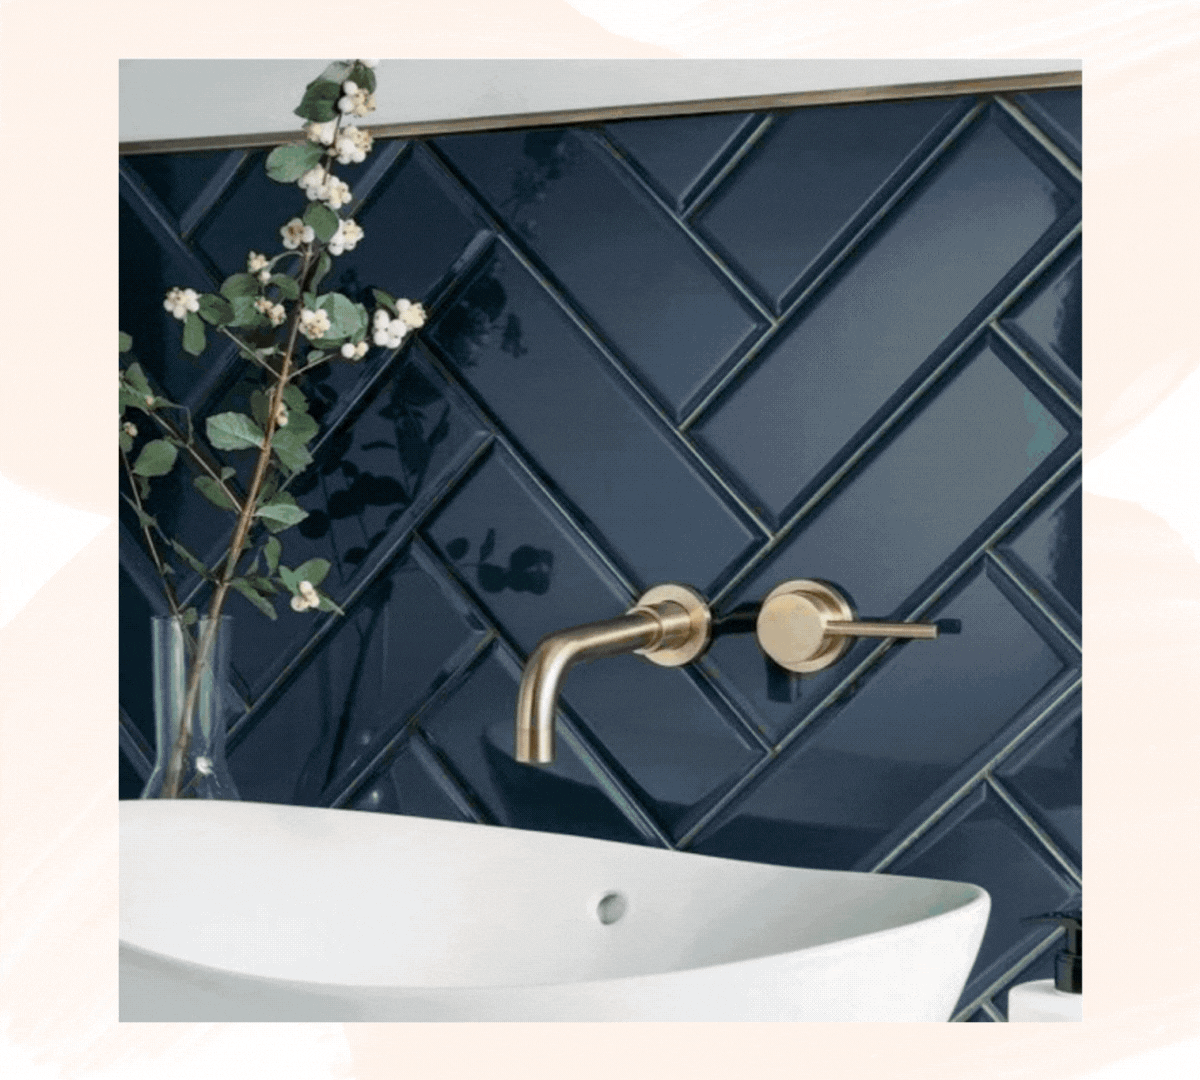 An animation showing various images of Subway Tiles | Material Depot